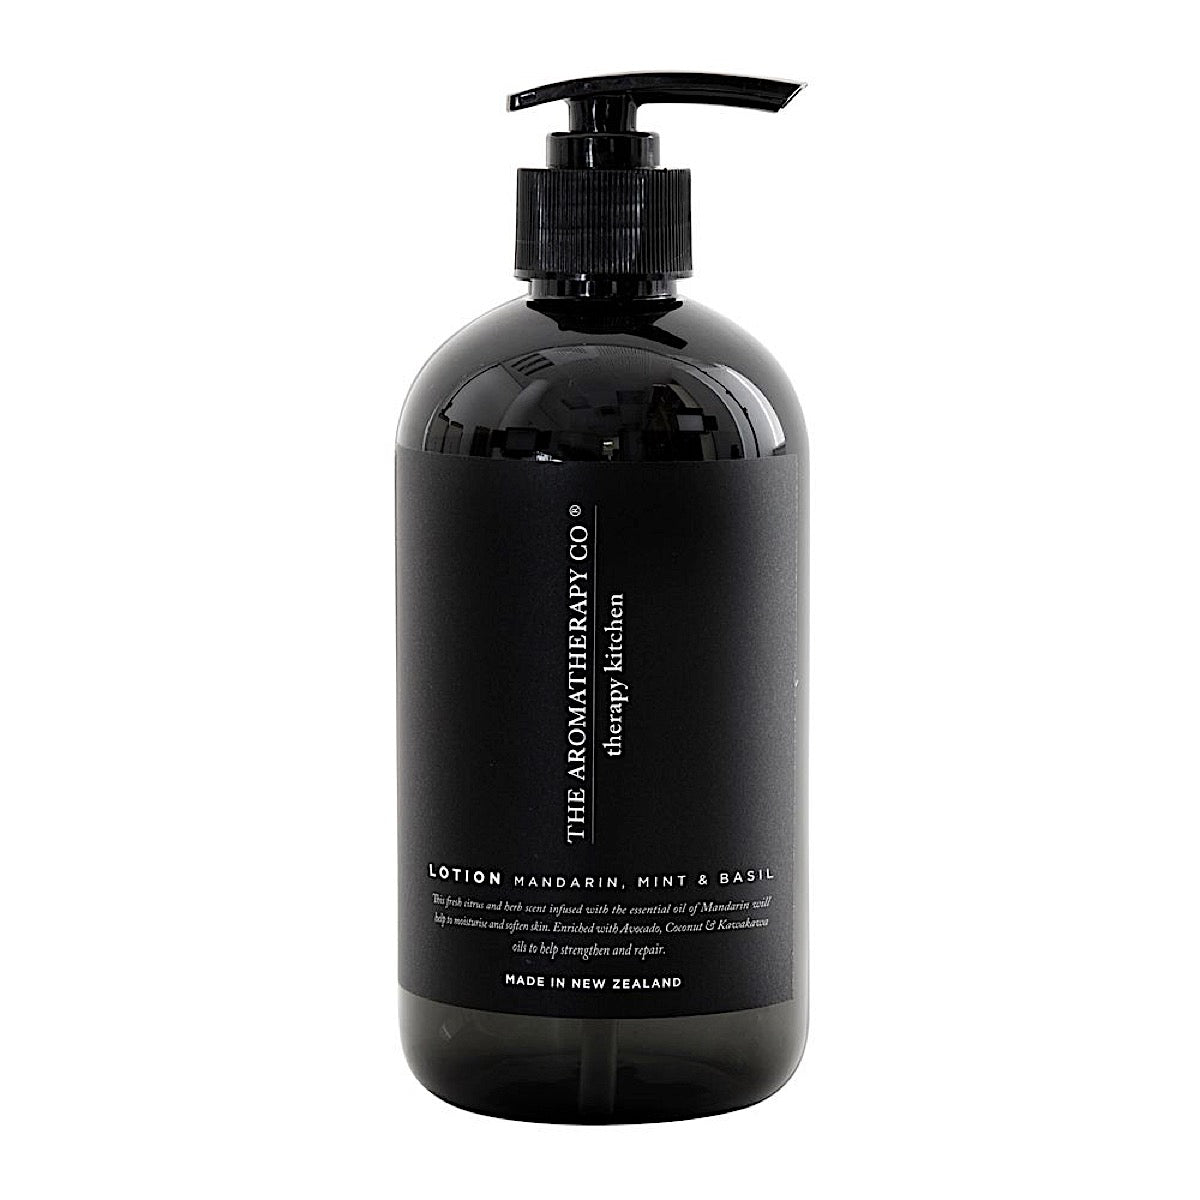 The Aromatherapy Co Therapy Kitchen Mandarin, Mint & Basil Hand Lotion at More Than Just A Gift